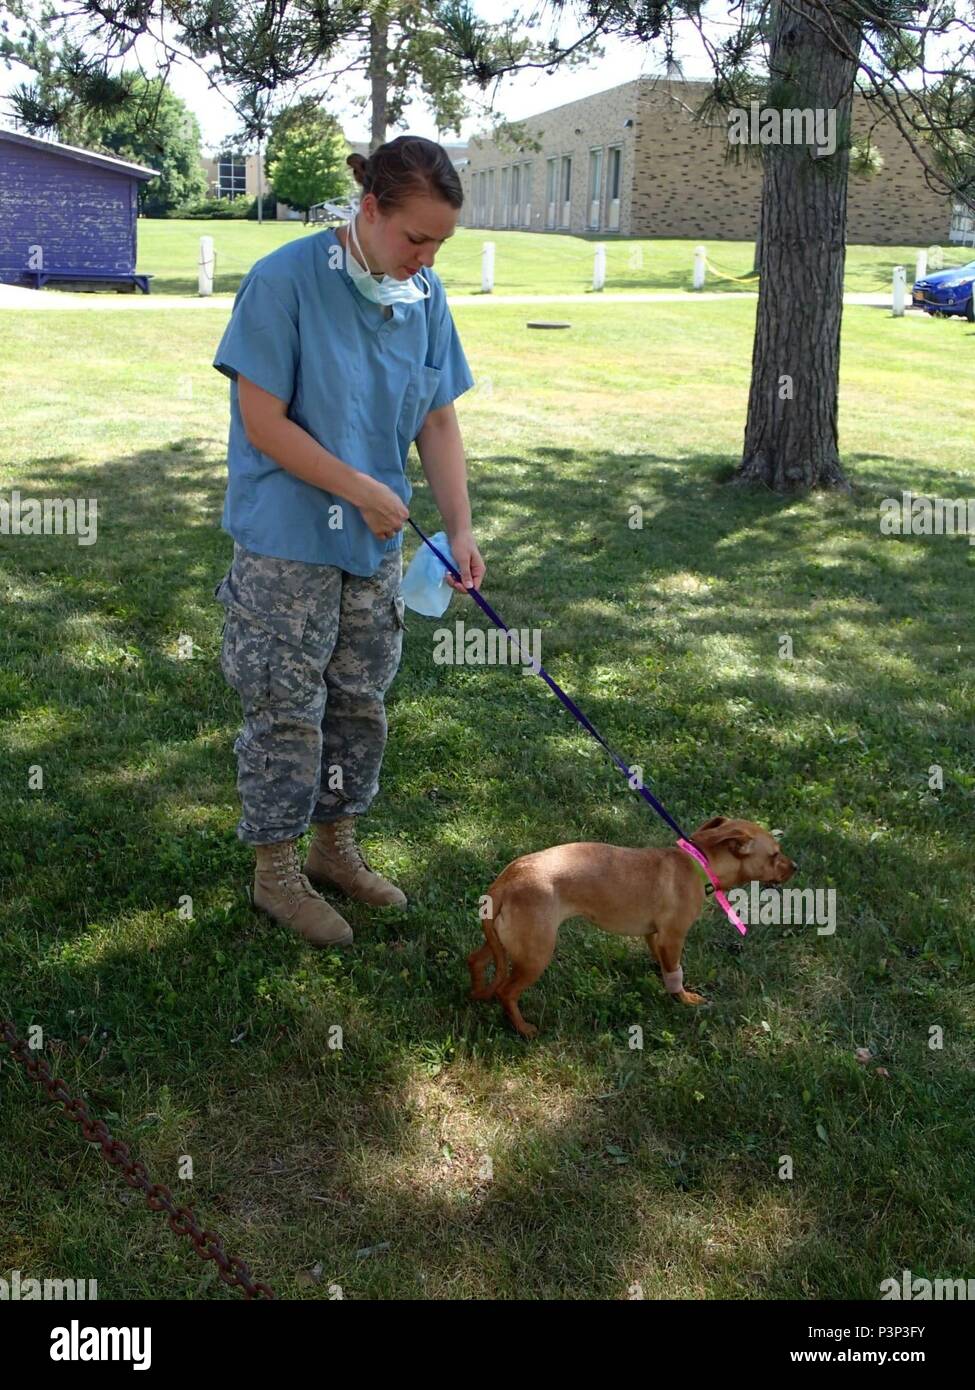 Spc. Megann Carpenter, a mechanic from the 422nd Medical Detachment Veterinary Services out of Rockville, Md., takes a dog for a walk after surgery during Greater Chenango Cares, July 23, 2016.  Greater Chenango Cares is one of the Innovative Readiness Training events which provides real-world training in a joint civil-military environment while delivering world class medical care to the people of Chenango County, N.Y., from July 15-24. Stock Photo